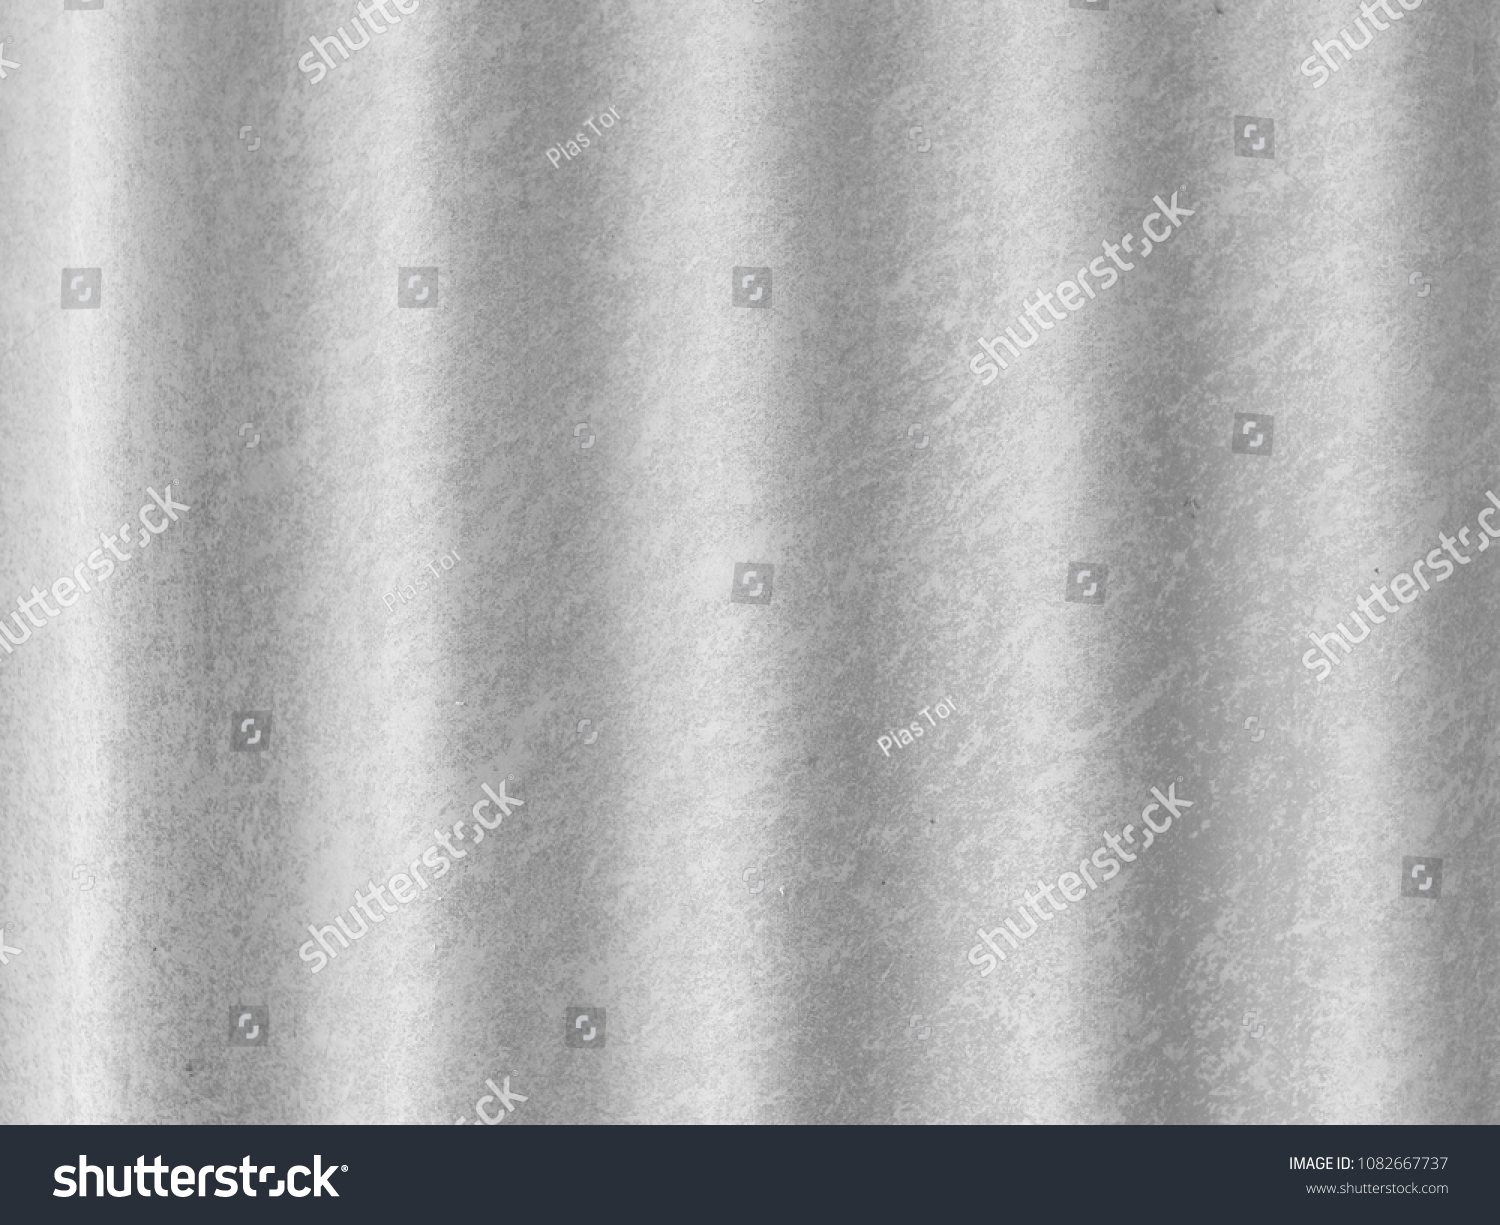 Corrugated fiber cement sheet texture or background seen in vertical repetitive pattern. #1082667737